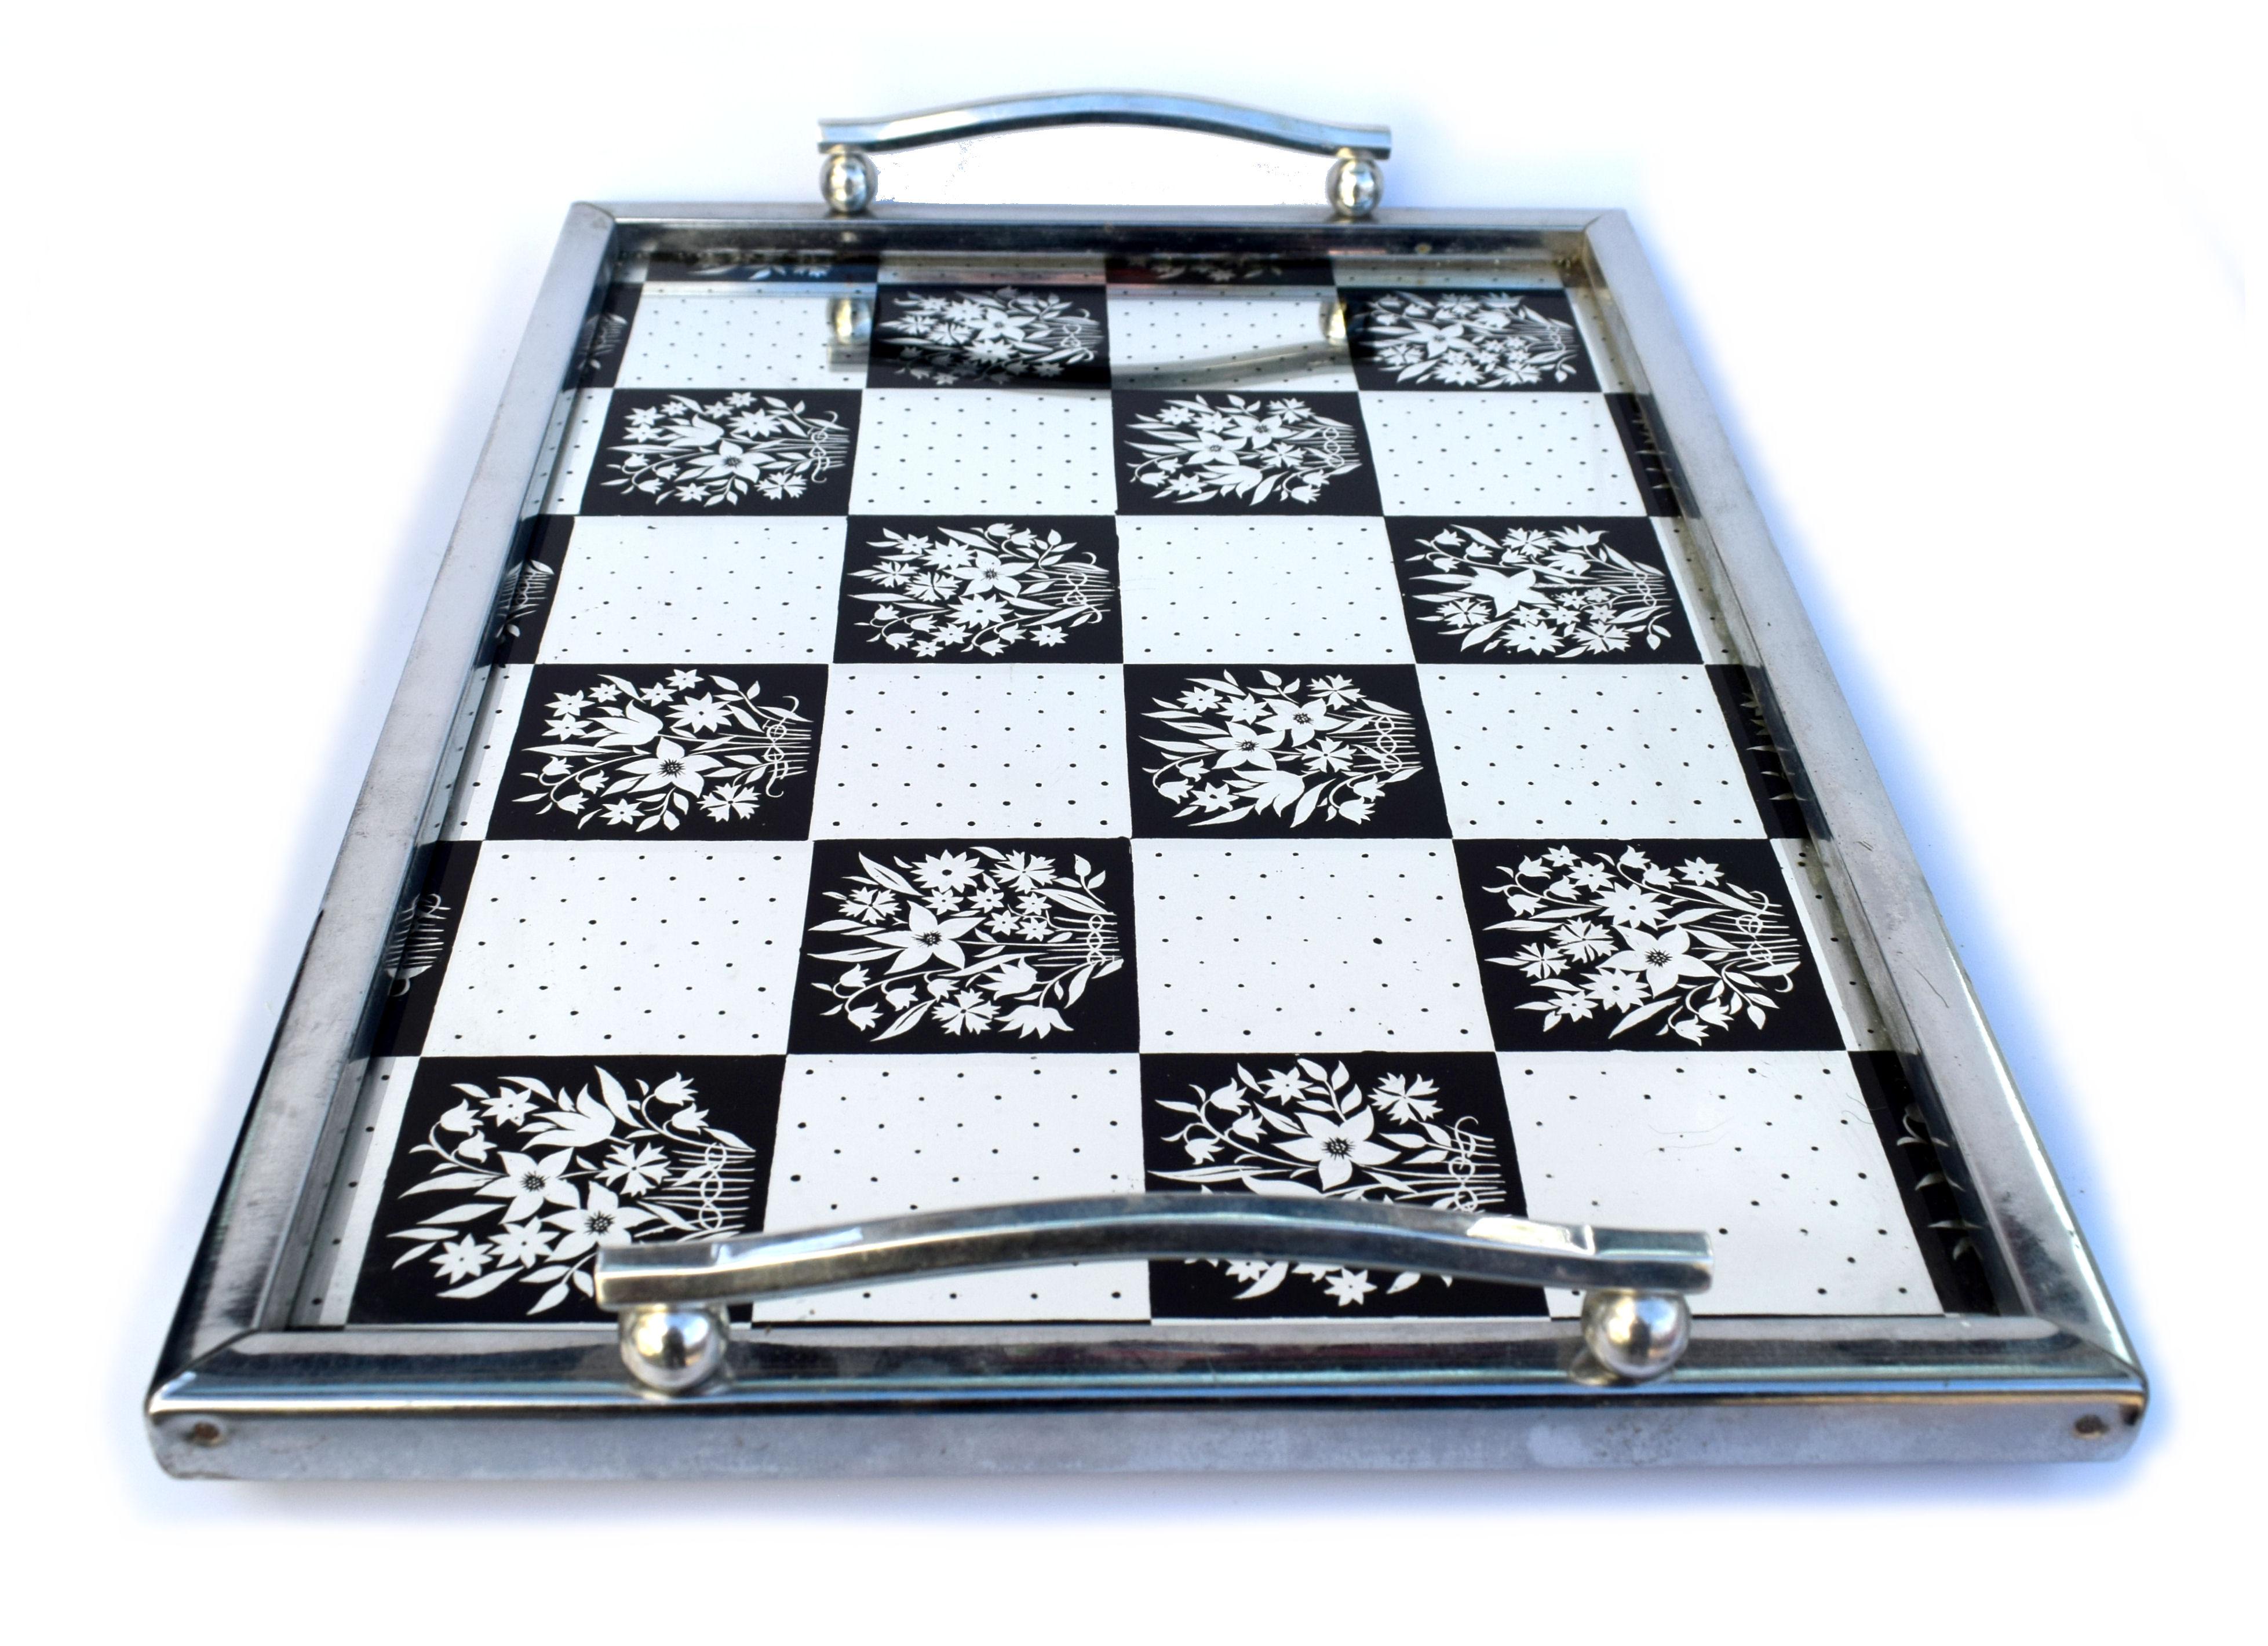 Very stylish and in superb condition is this English, 1930s Art Deco mirrored drinks tray. The chrome surround and handles with ply base support a chequered effect mirrored glass base. Very glamorous and ideal for serving drinks on or even use as